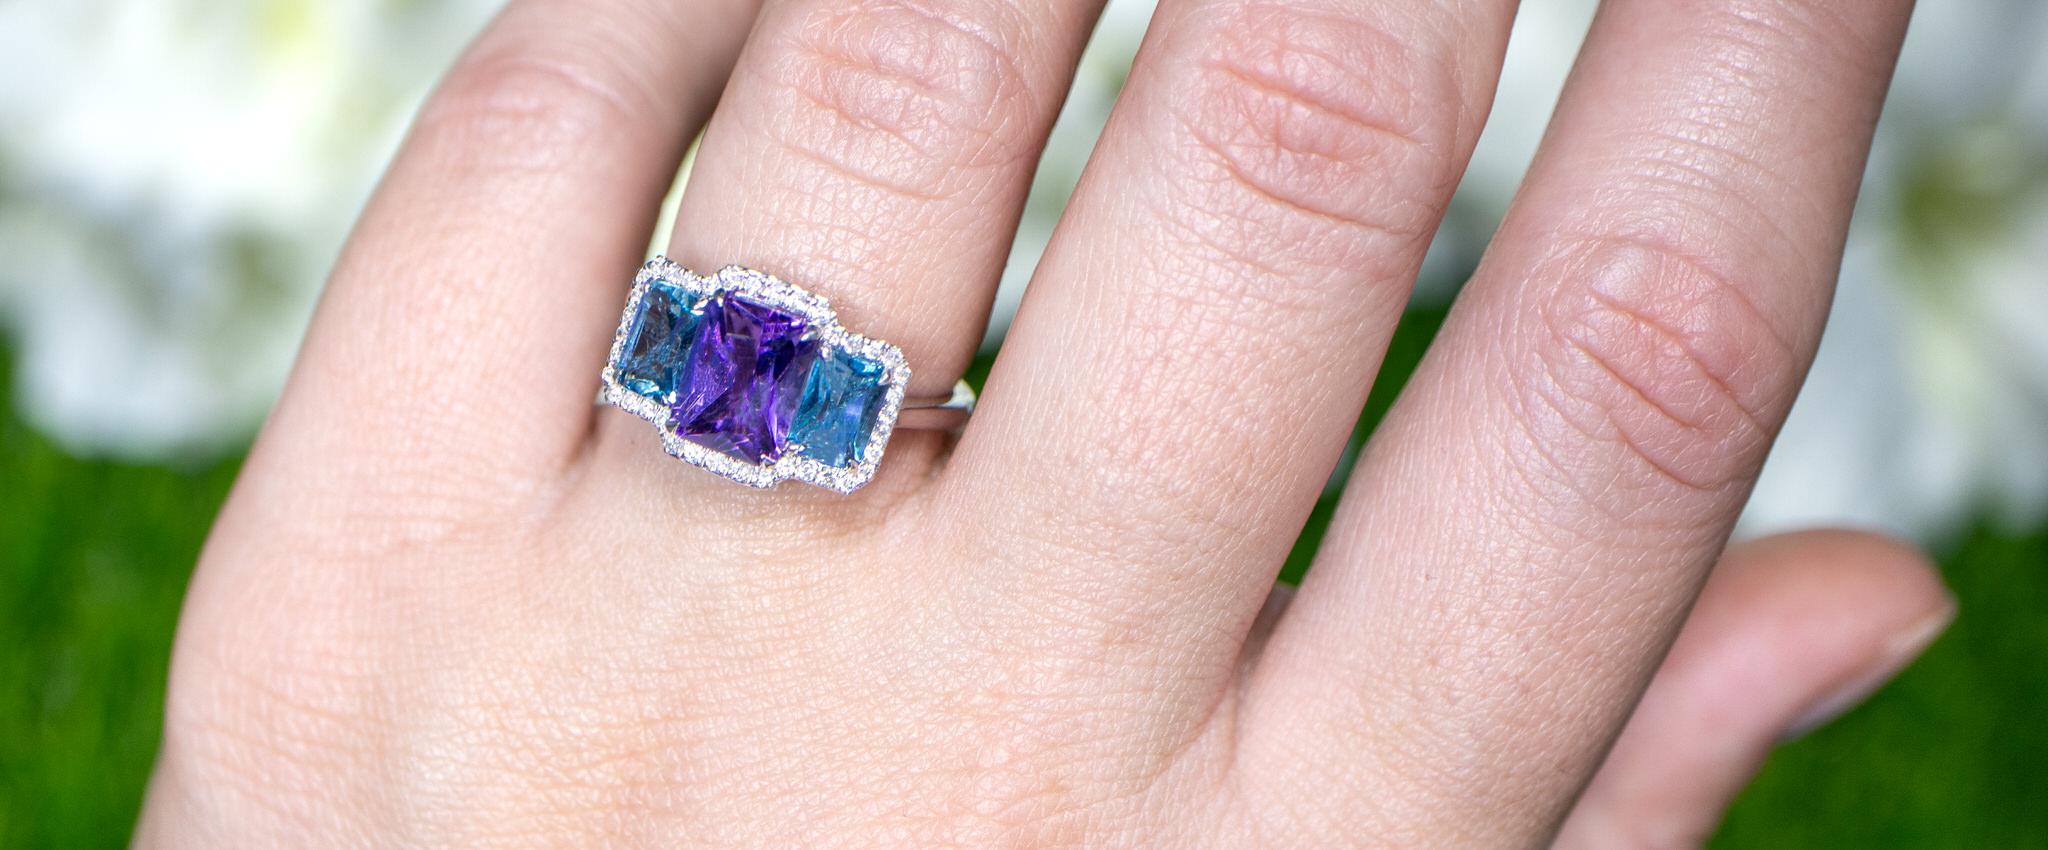 Amethyst and London Blue Topaz Three Stone Ring Diamond Setting 3.06 Carats 18K In Excellent Condition For Sale In Laguna Niguel, CA